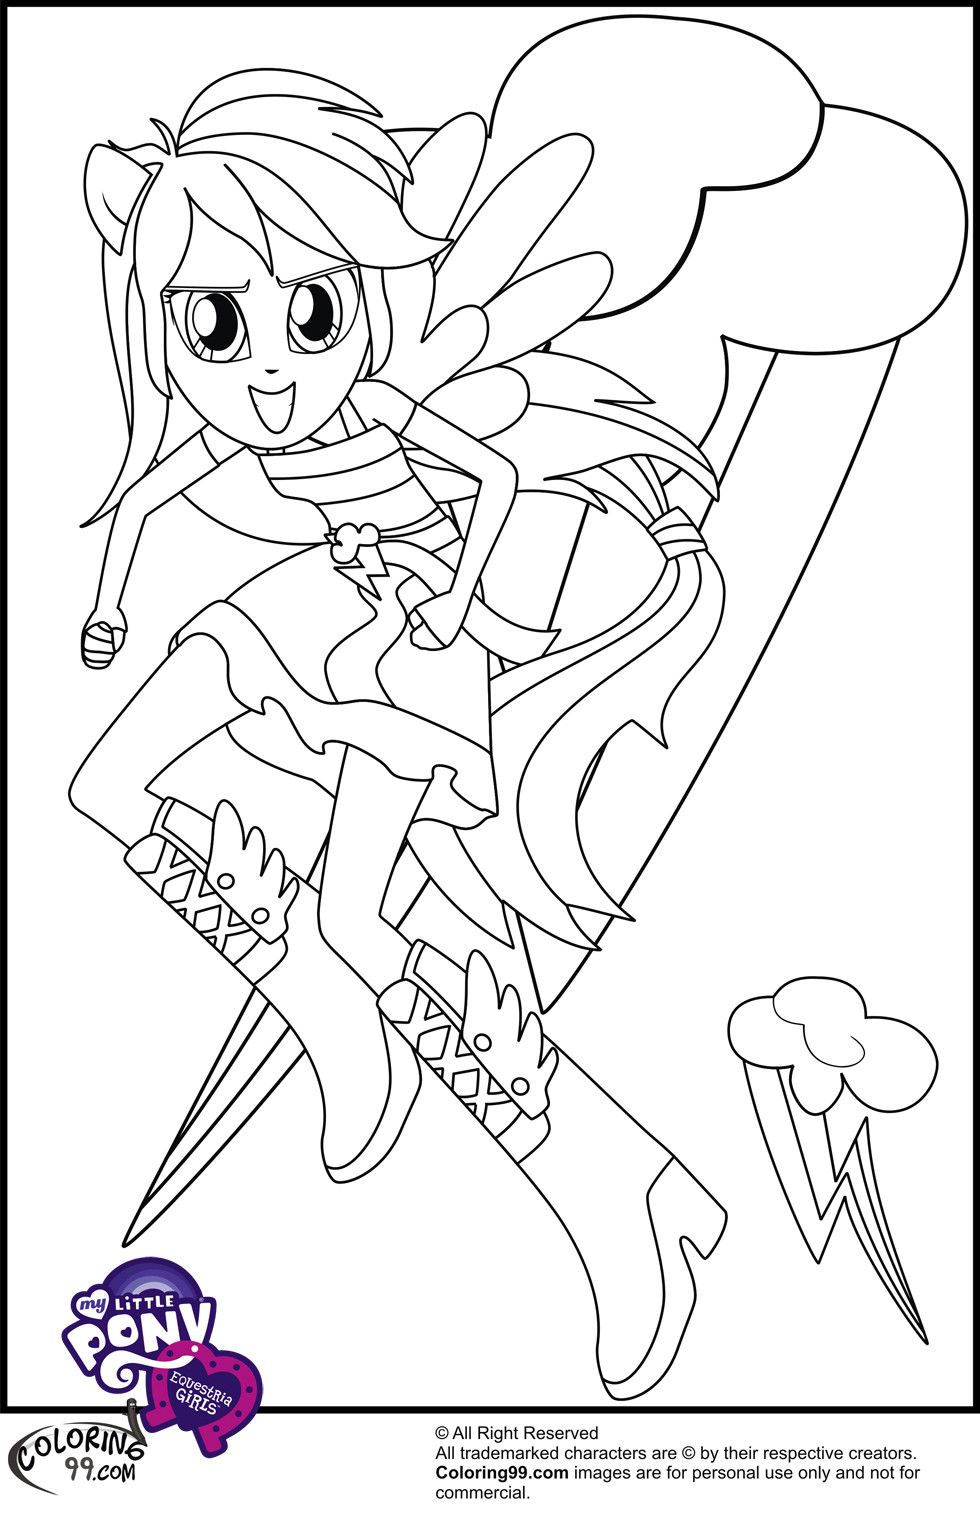 Equestria Girls Rainbow Dash Coloring Pages
 My Little Pony Equestria Girls Coloring Pages